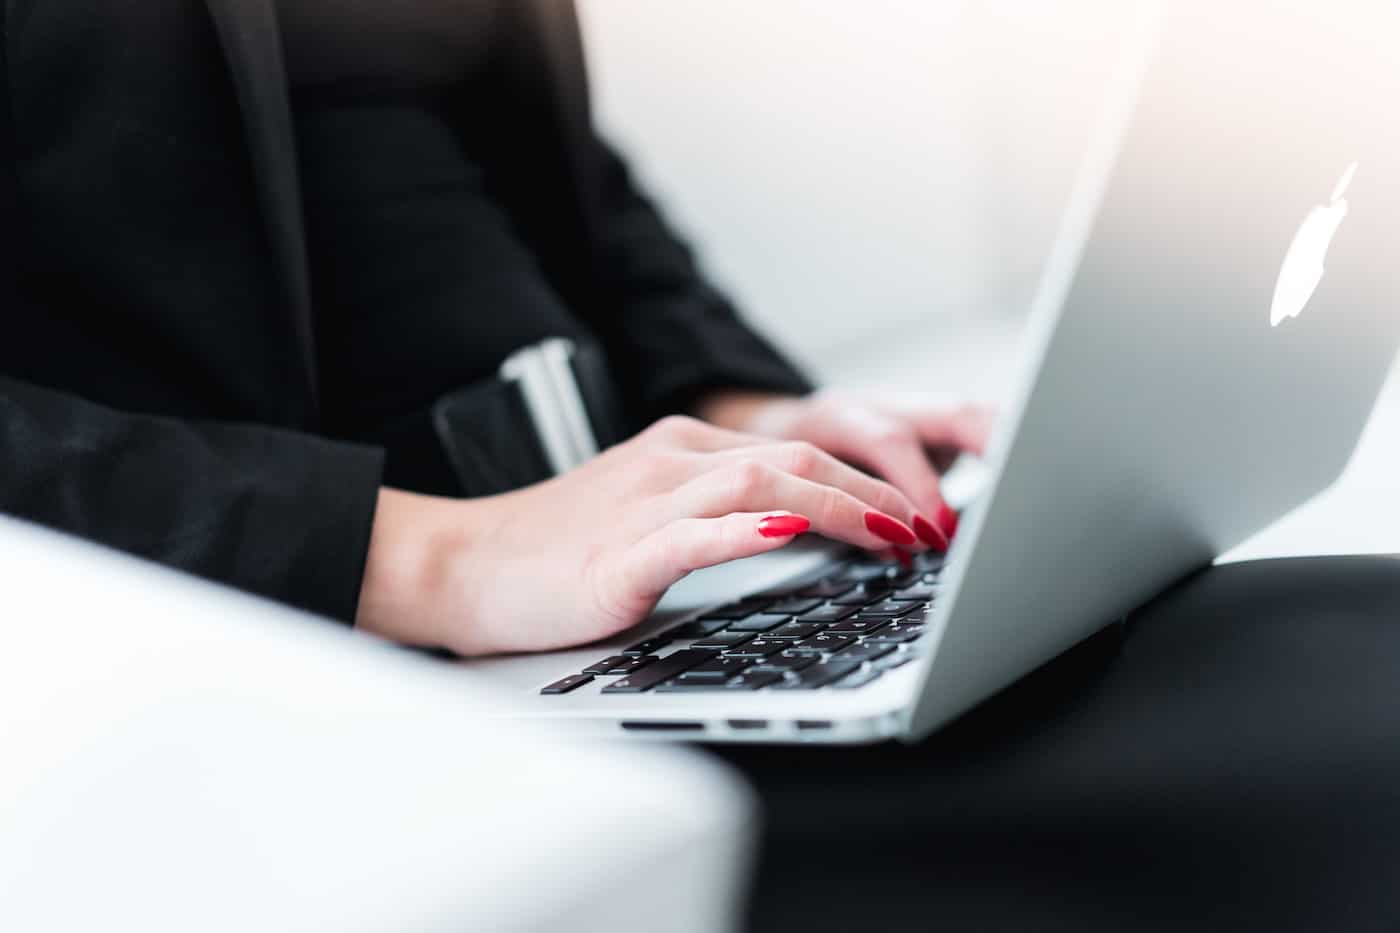 Business Woman With Red Finger Nails Typing on a Macbook Pro